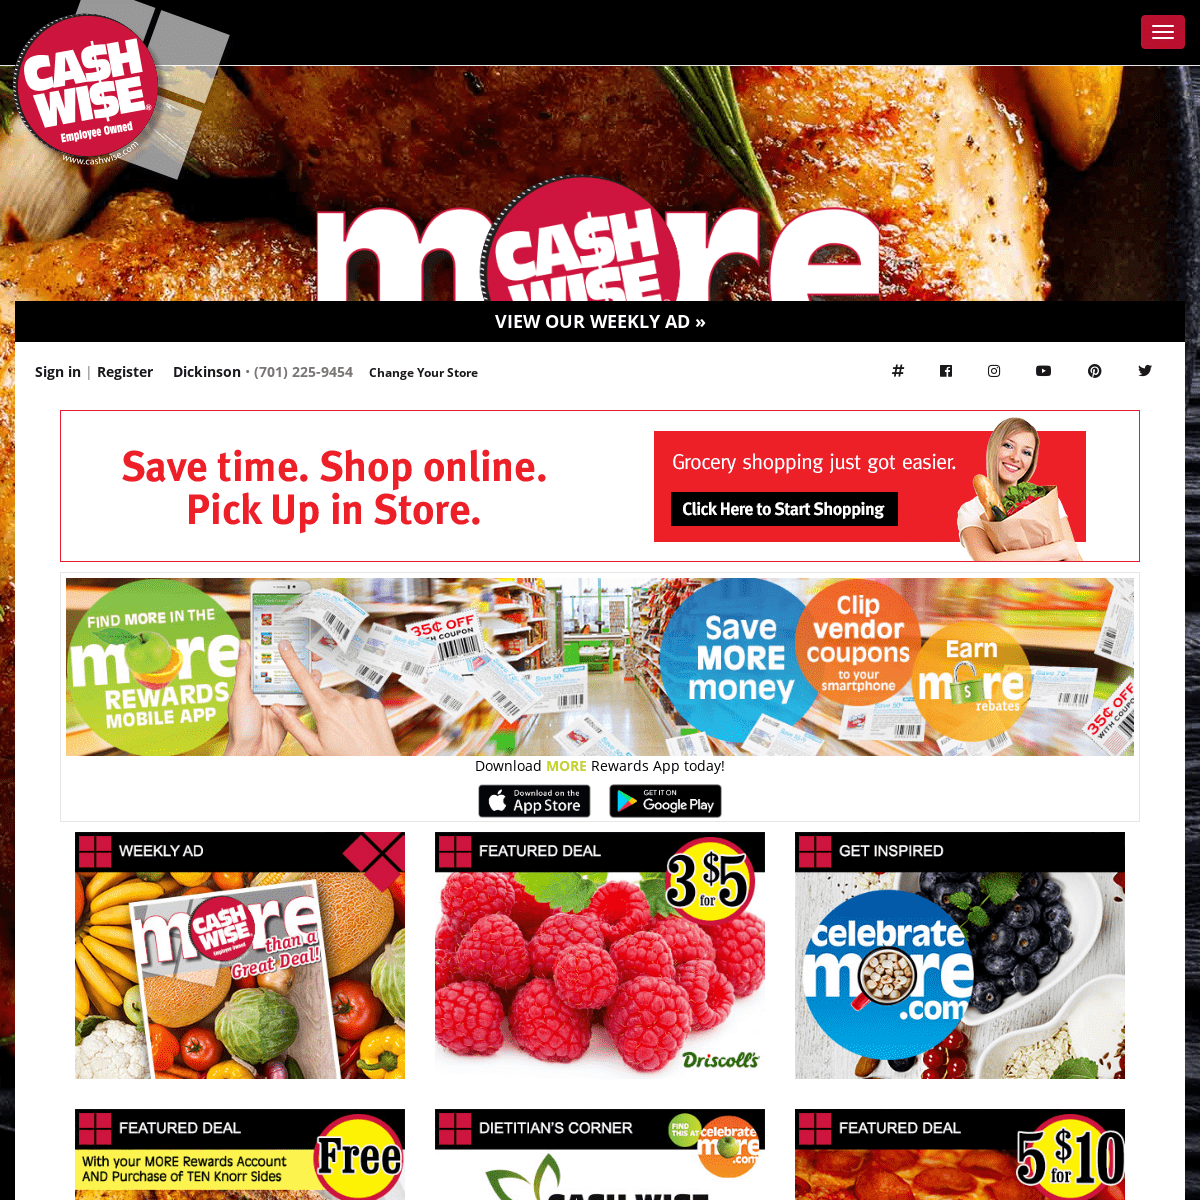 Cash Wise Foods | More than a Great Deal!